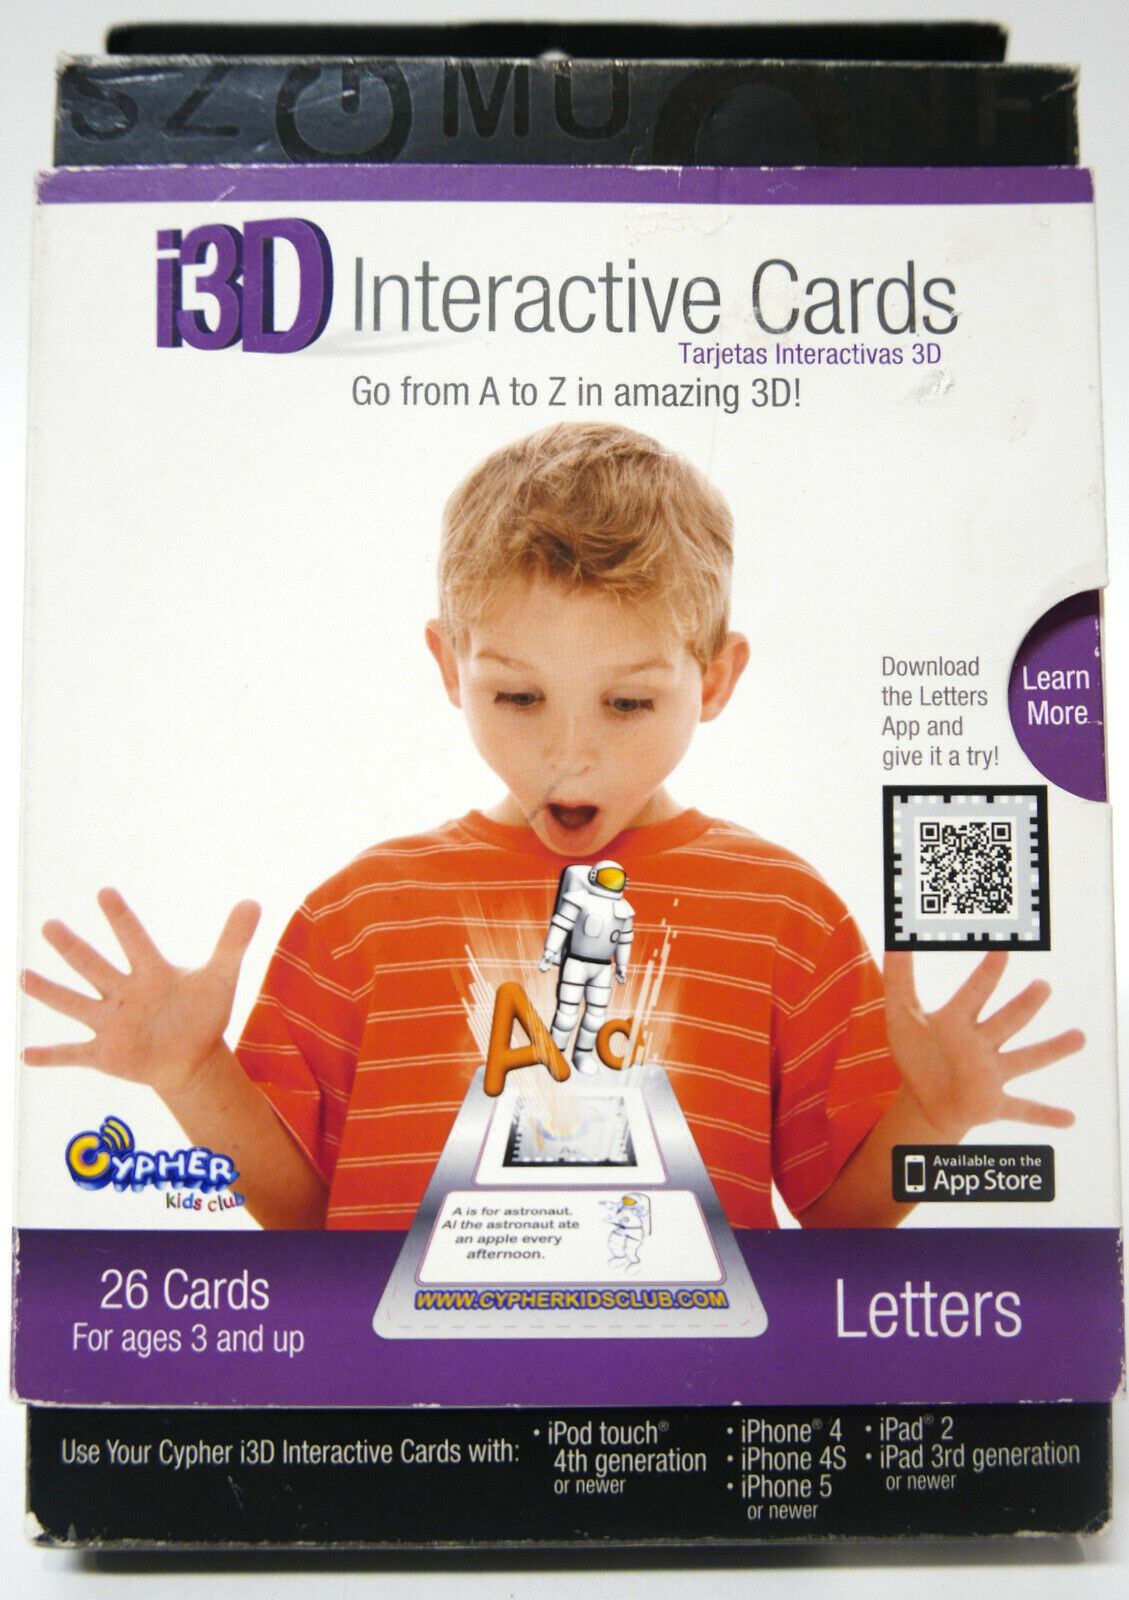 Cypher Kids Club I3d Interactive Learning Cards - Letters New Use Ipad Iphone